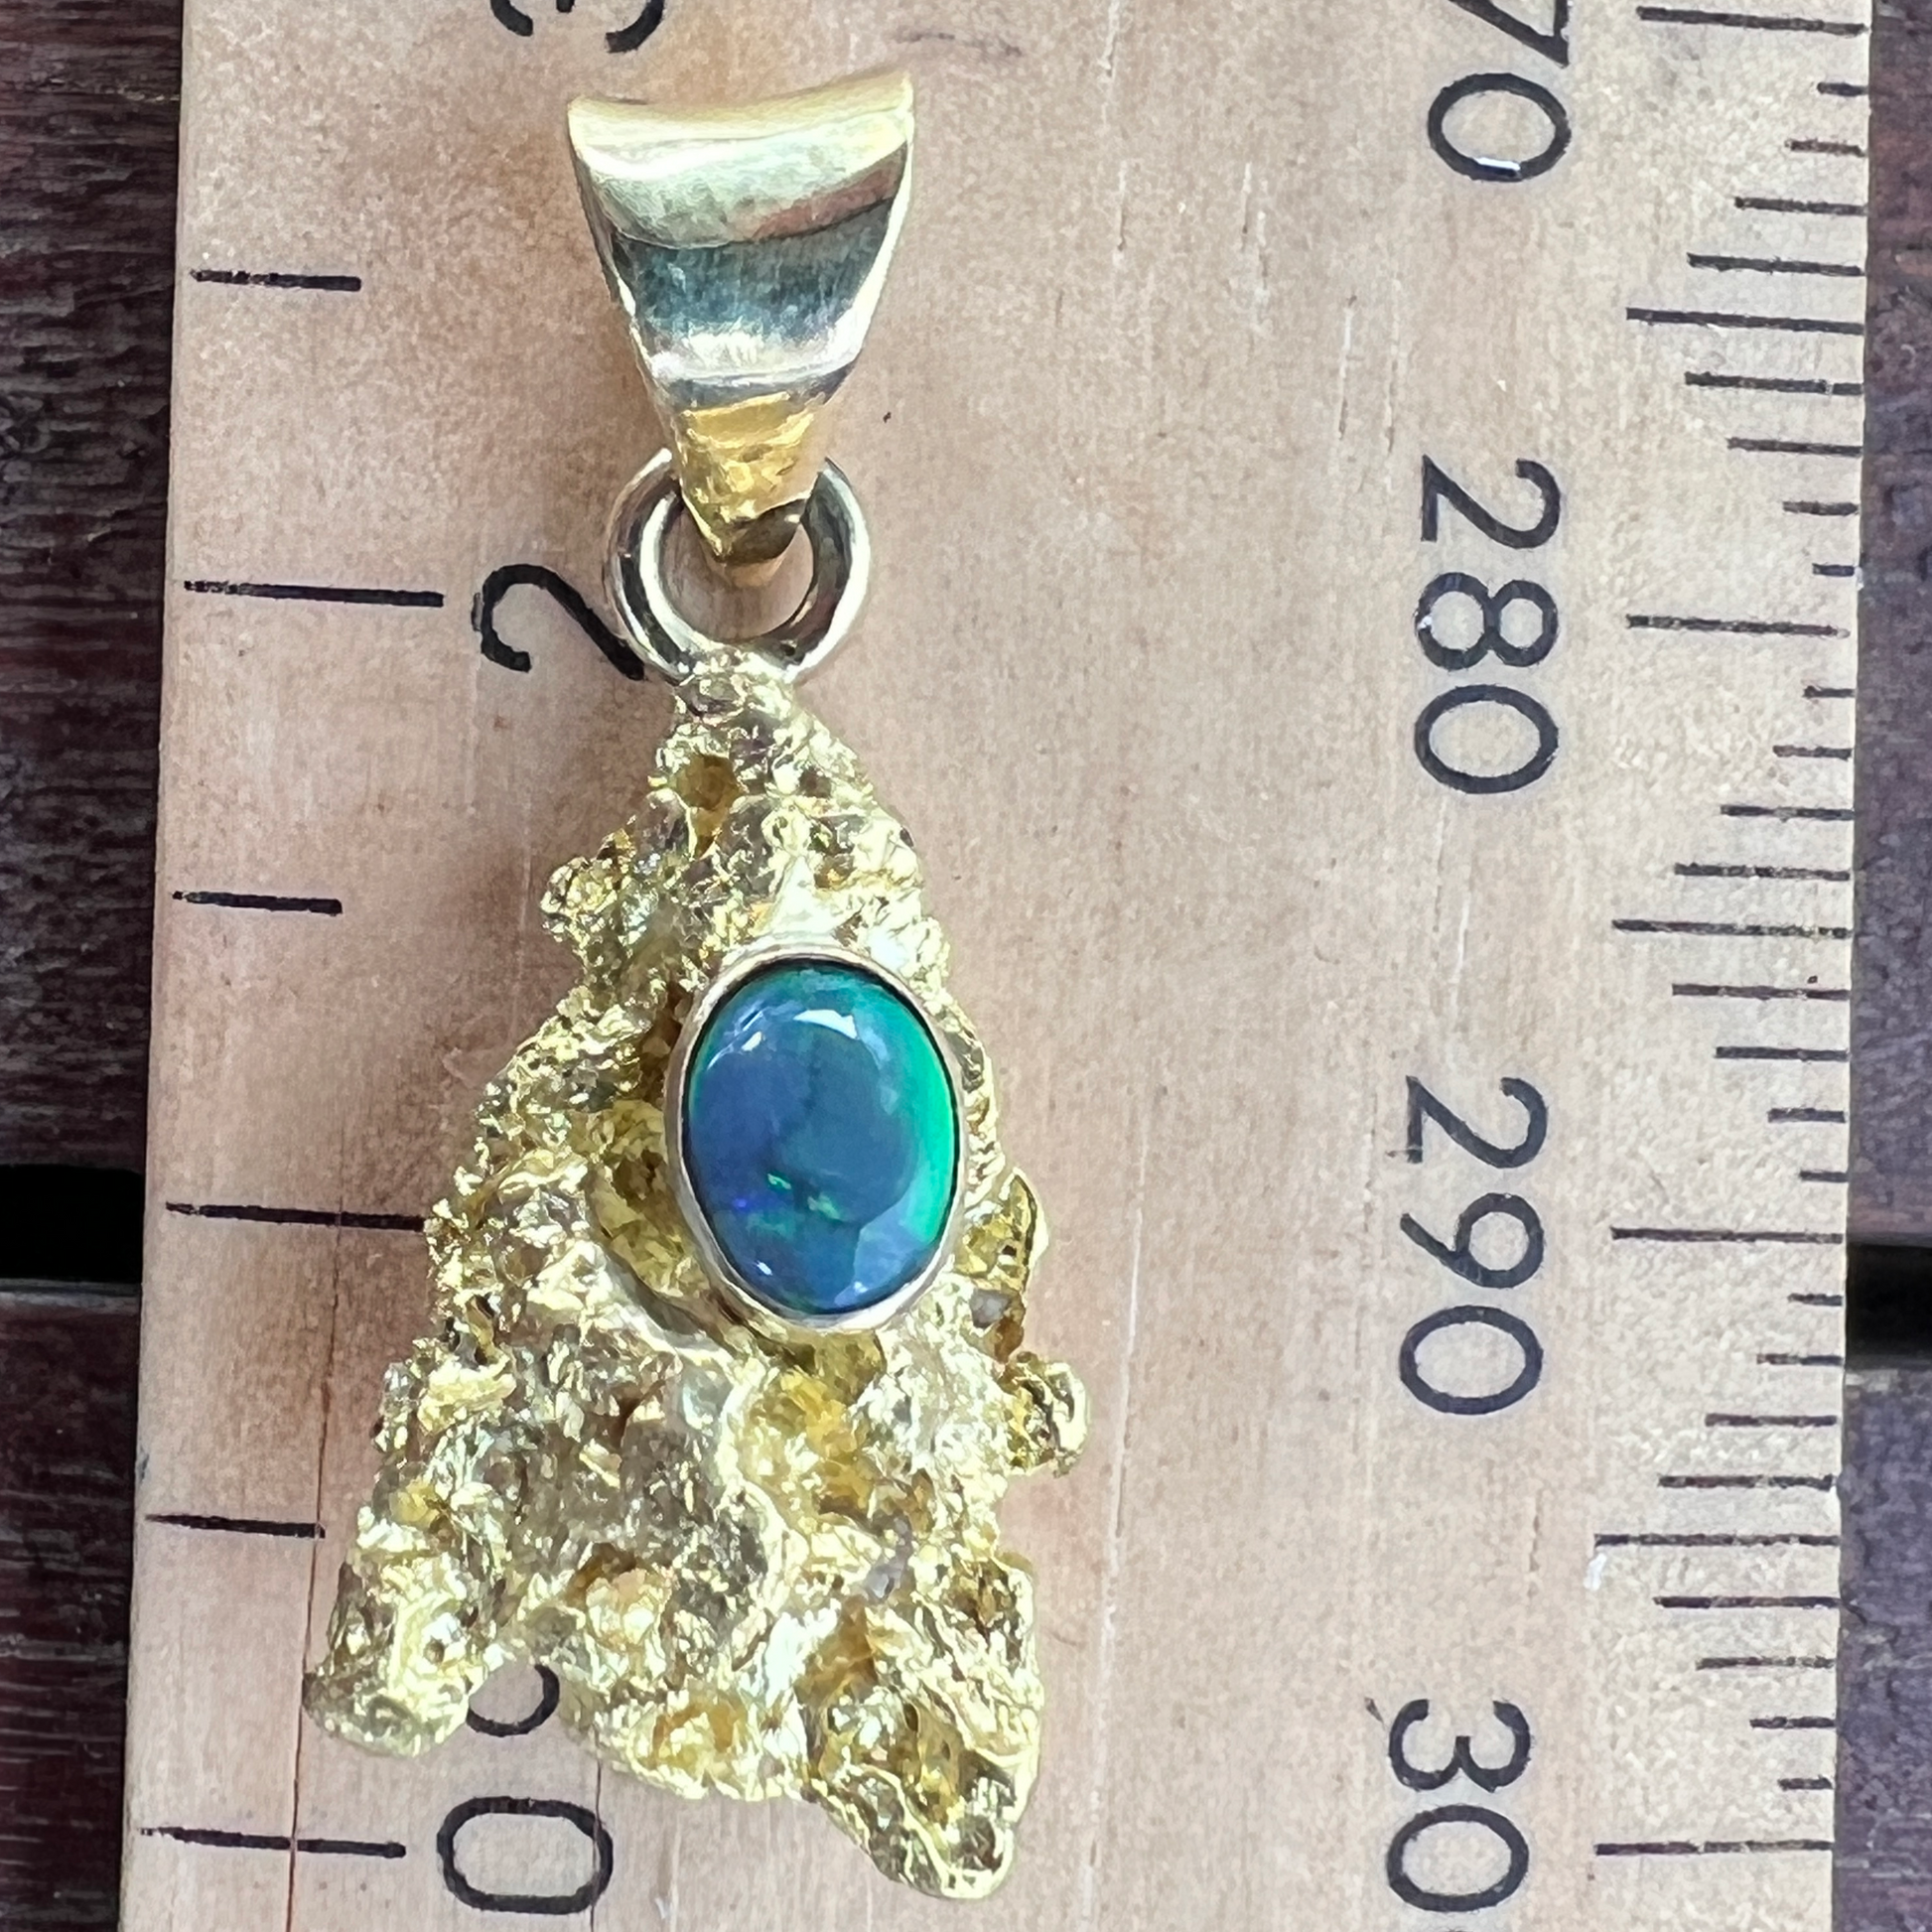 Pure solid gold nugget pendant from Western Australia. Perfectly set and balanced with an 18ct bale. Set with a beautifully cut black opal from Lightning Ridge.